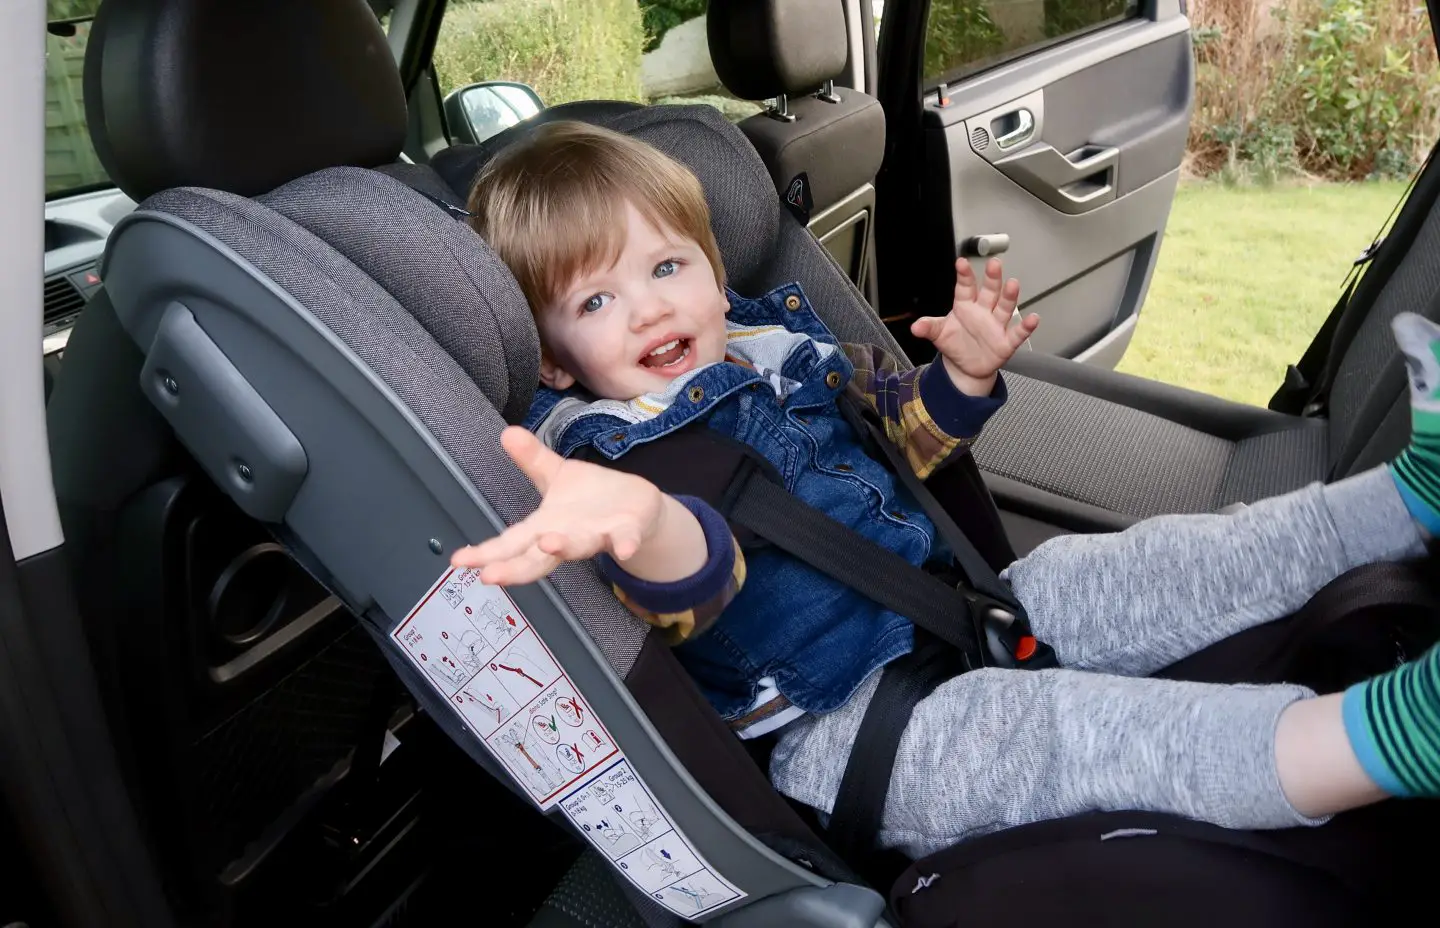 Diono Radian 5 Extended Rear Facing Car Seat | Piglet In Seat https://oddhogg.com